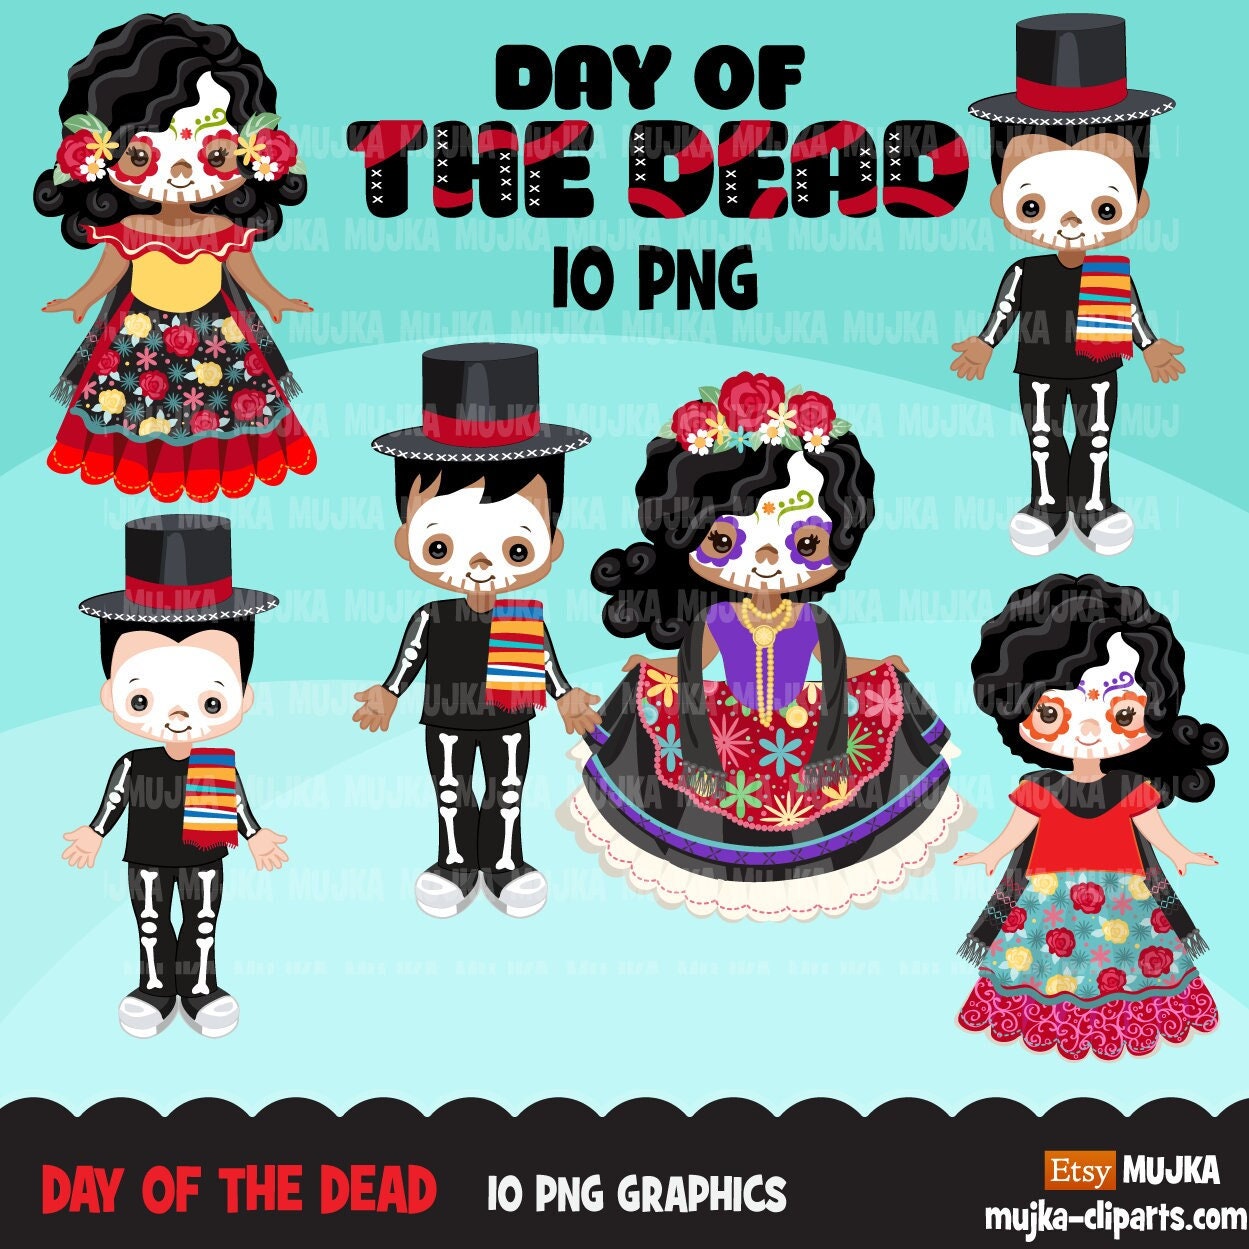 Day of the Dead PNG, Día De Los Muertos Clipart, Halloween graphics, Mexican holiday sublimation designs, sugar skull Png, boys and girls